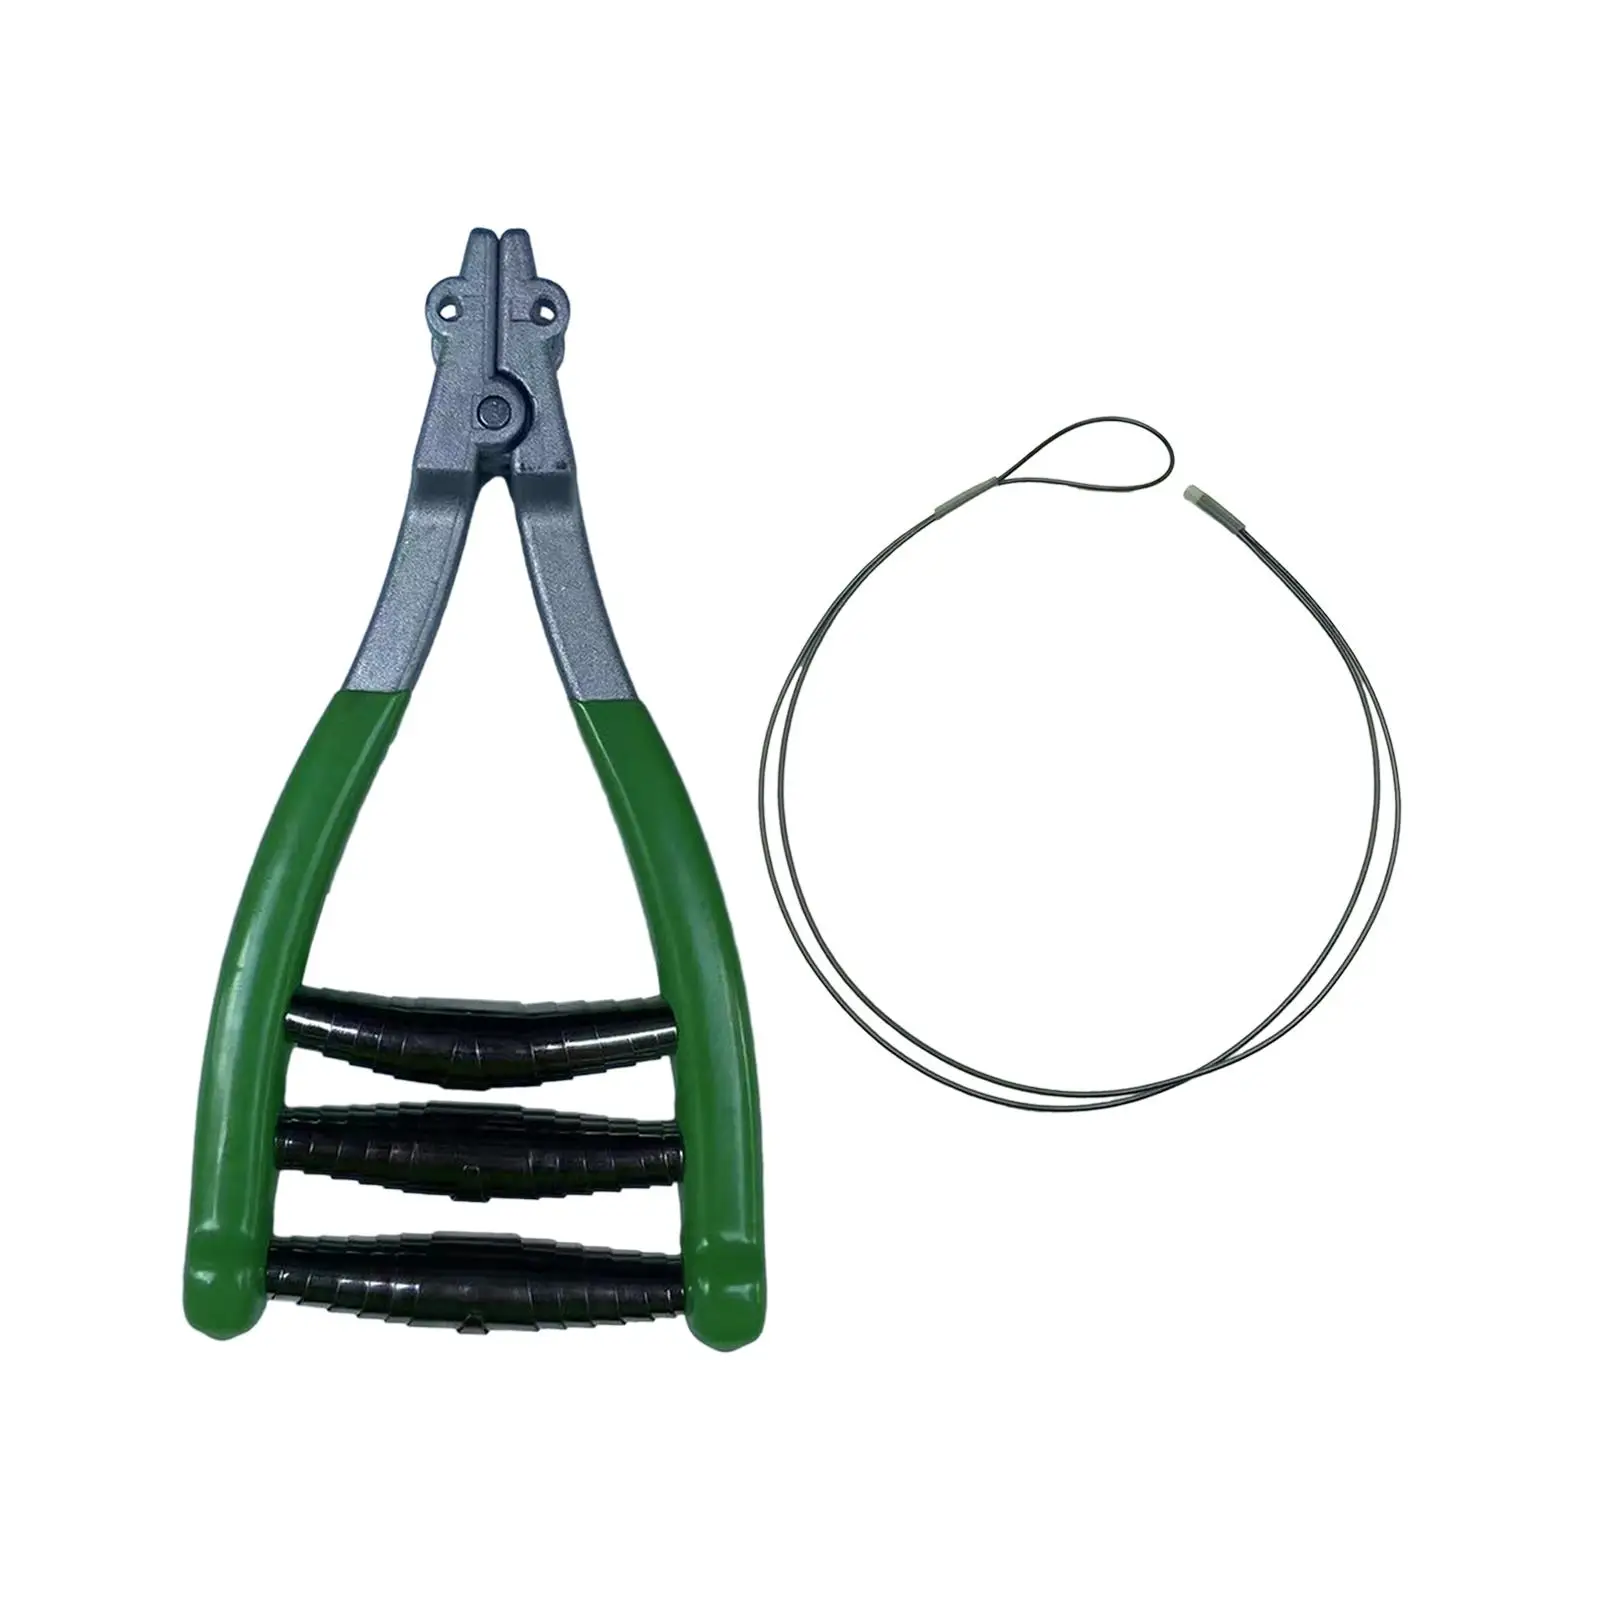 Starting Clamp Professional Stringing Clamp Durable Sports Alloy Portable Tennis Equipment Stringing Tool for Tennis Squash